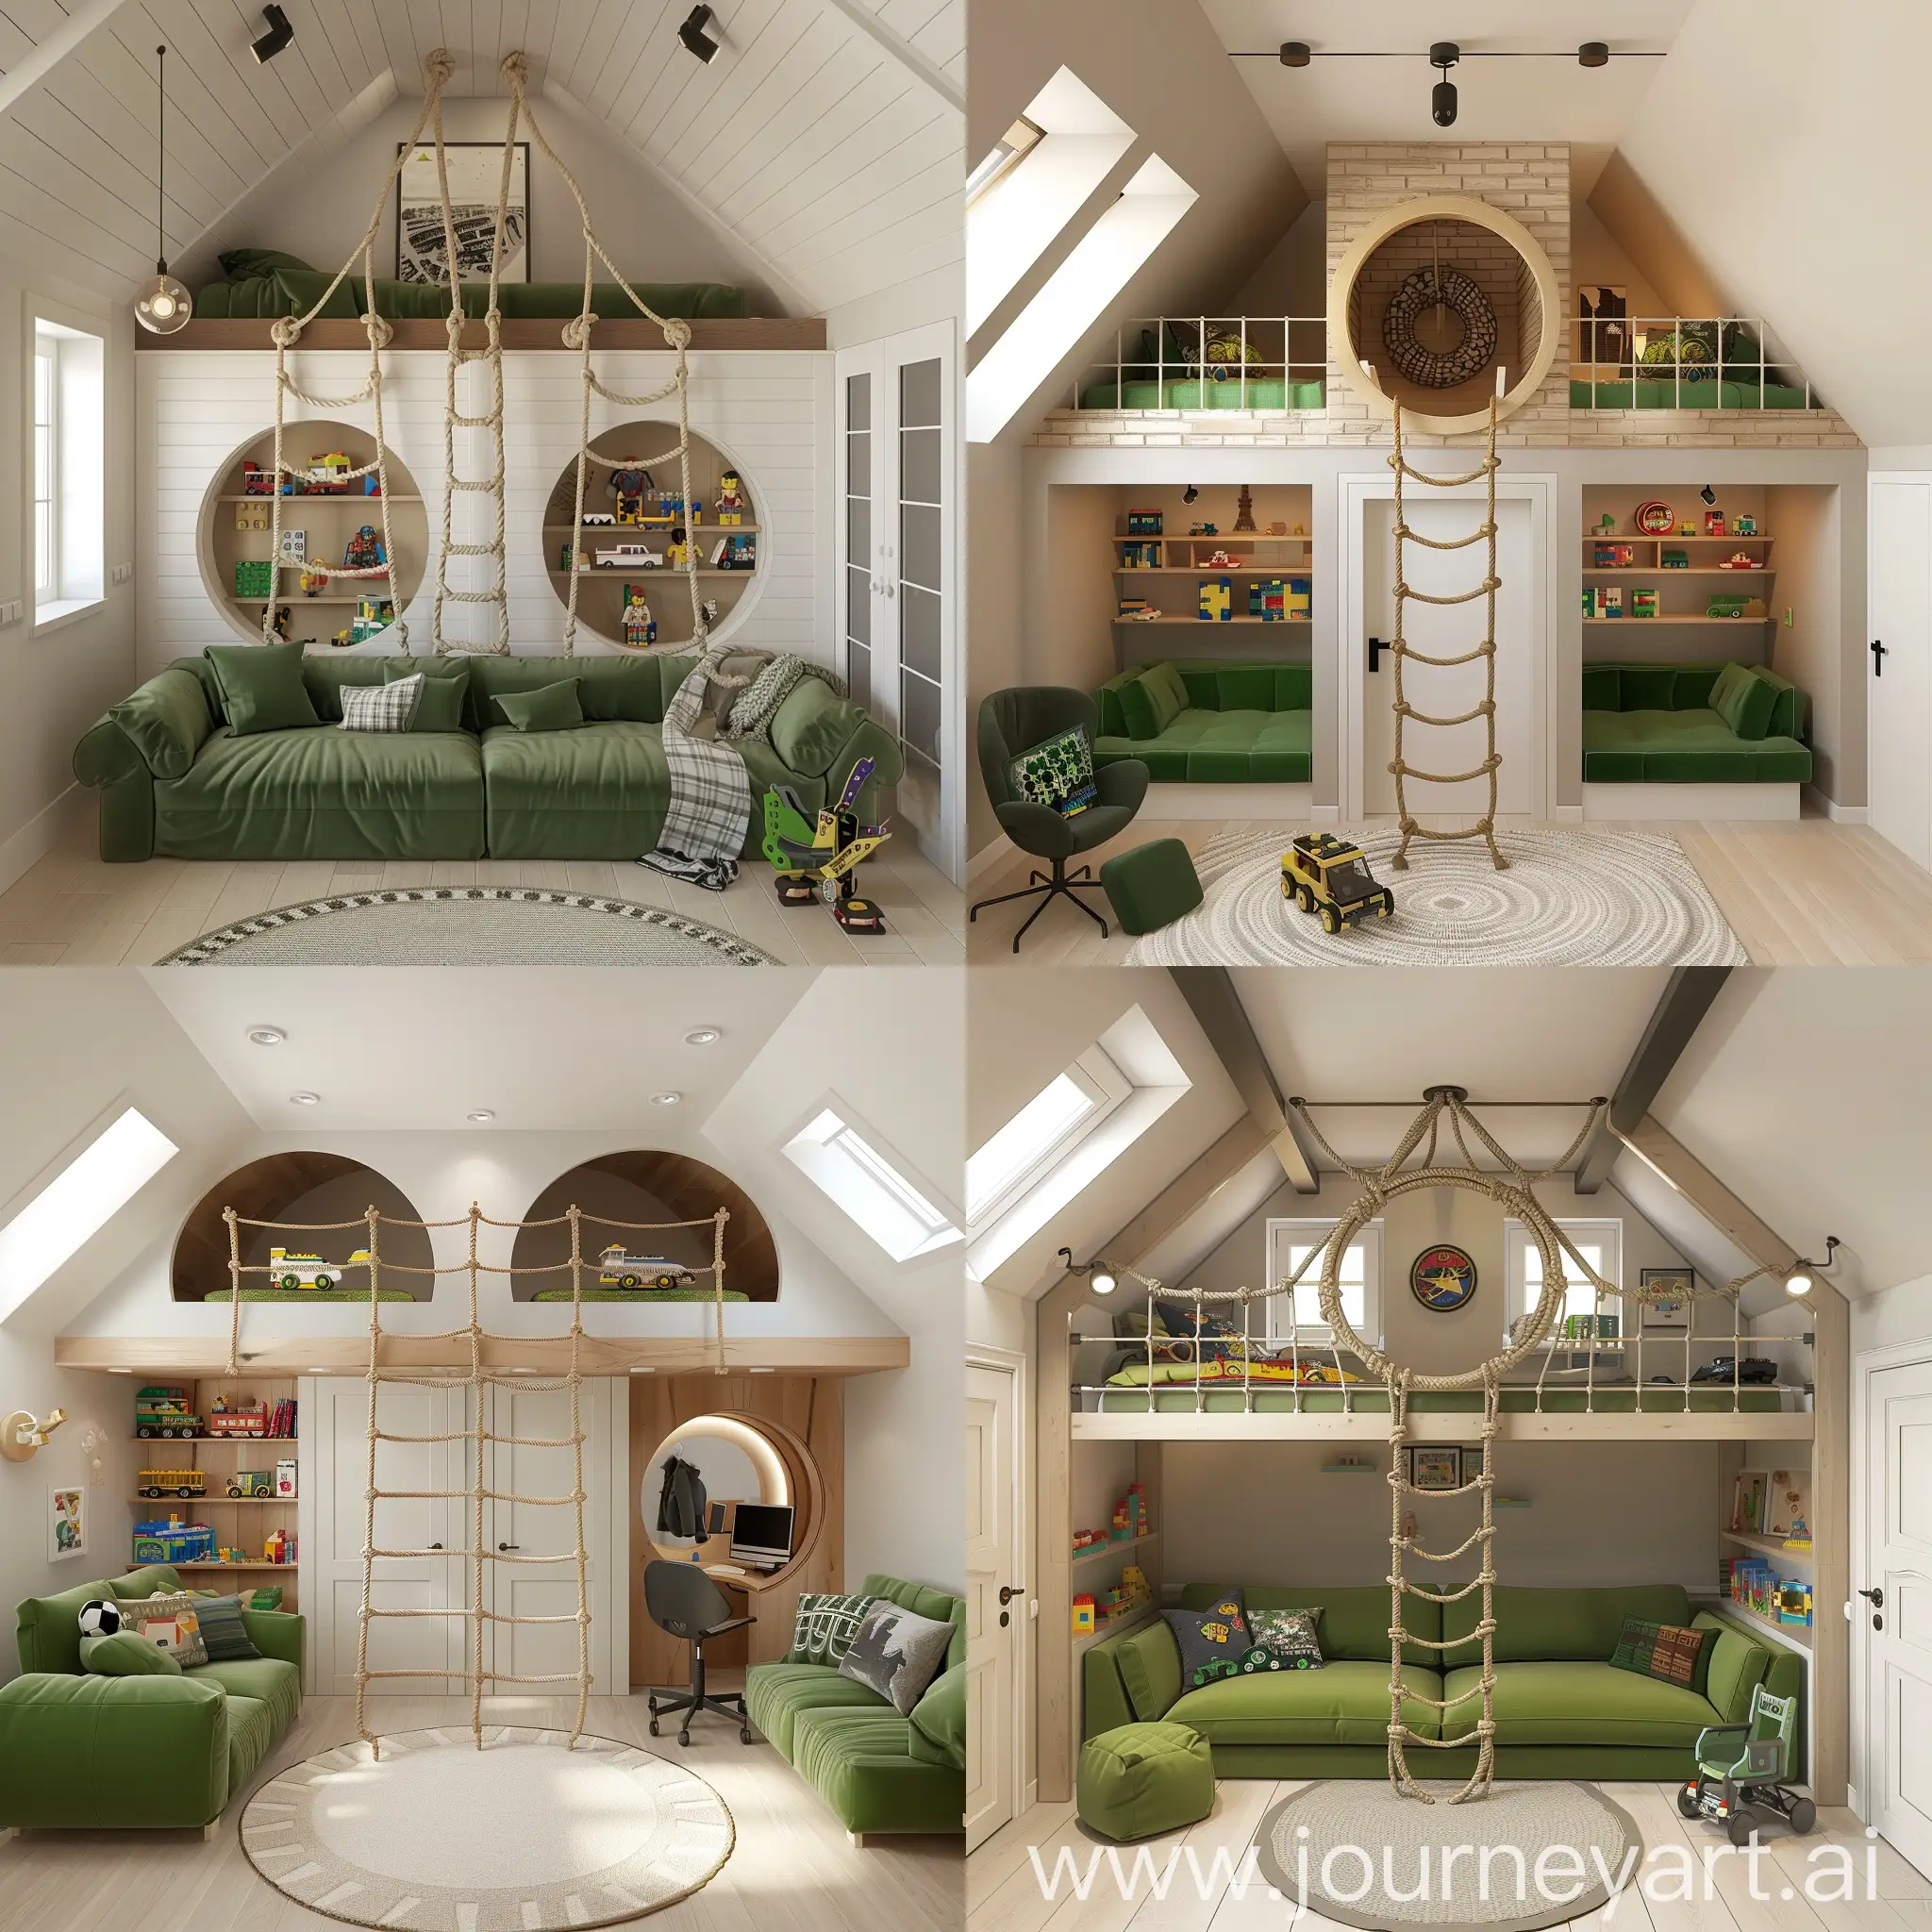 Modern-Childs-Room-with-TwoLevel-Play-Niche-and-Green-Sofa